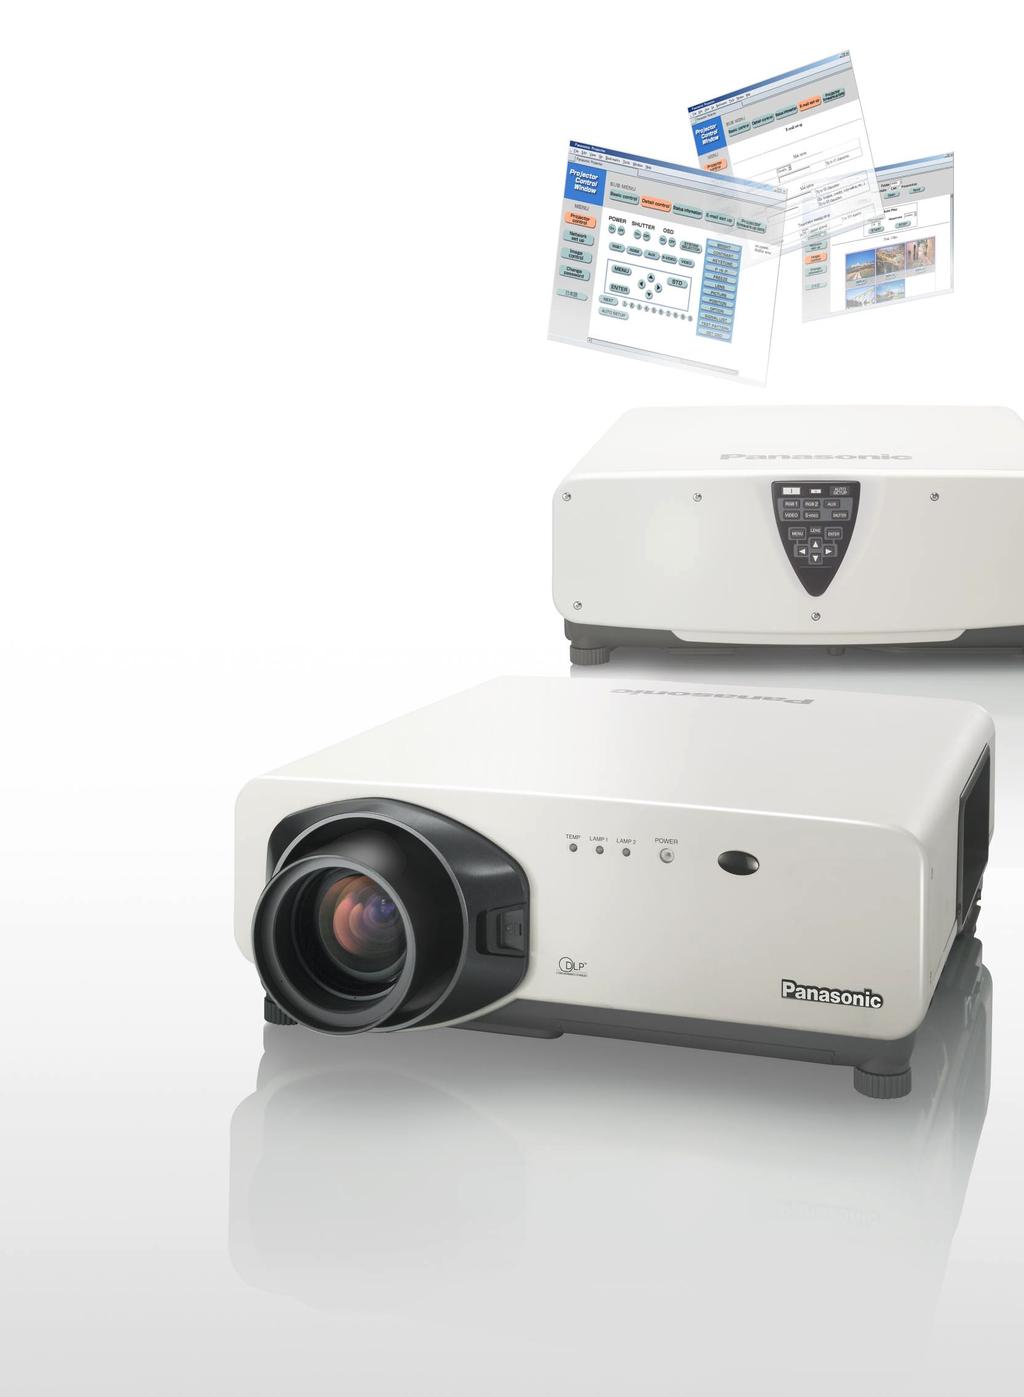 The New State of the Art in Image Projection With the and, Panasonic packs a host of leading-edge optical and digital technologies into a sleek, compact body.